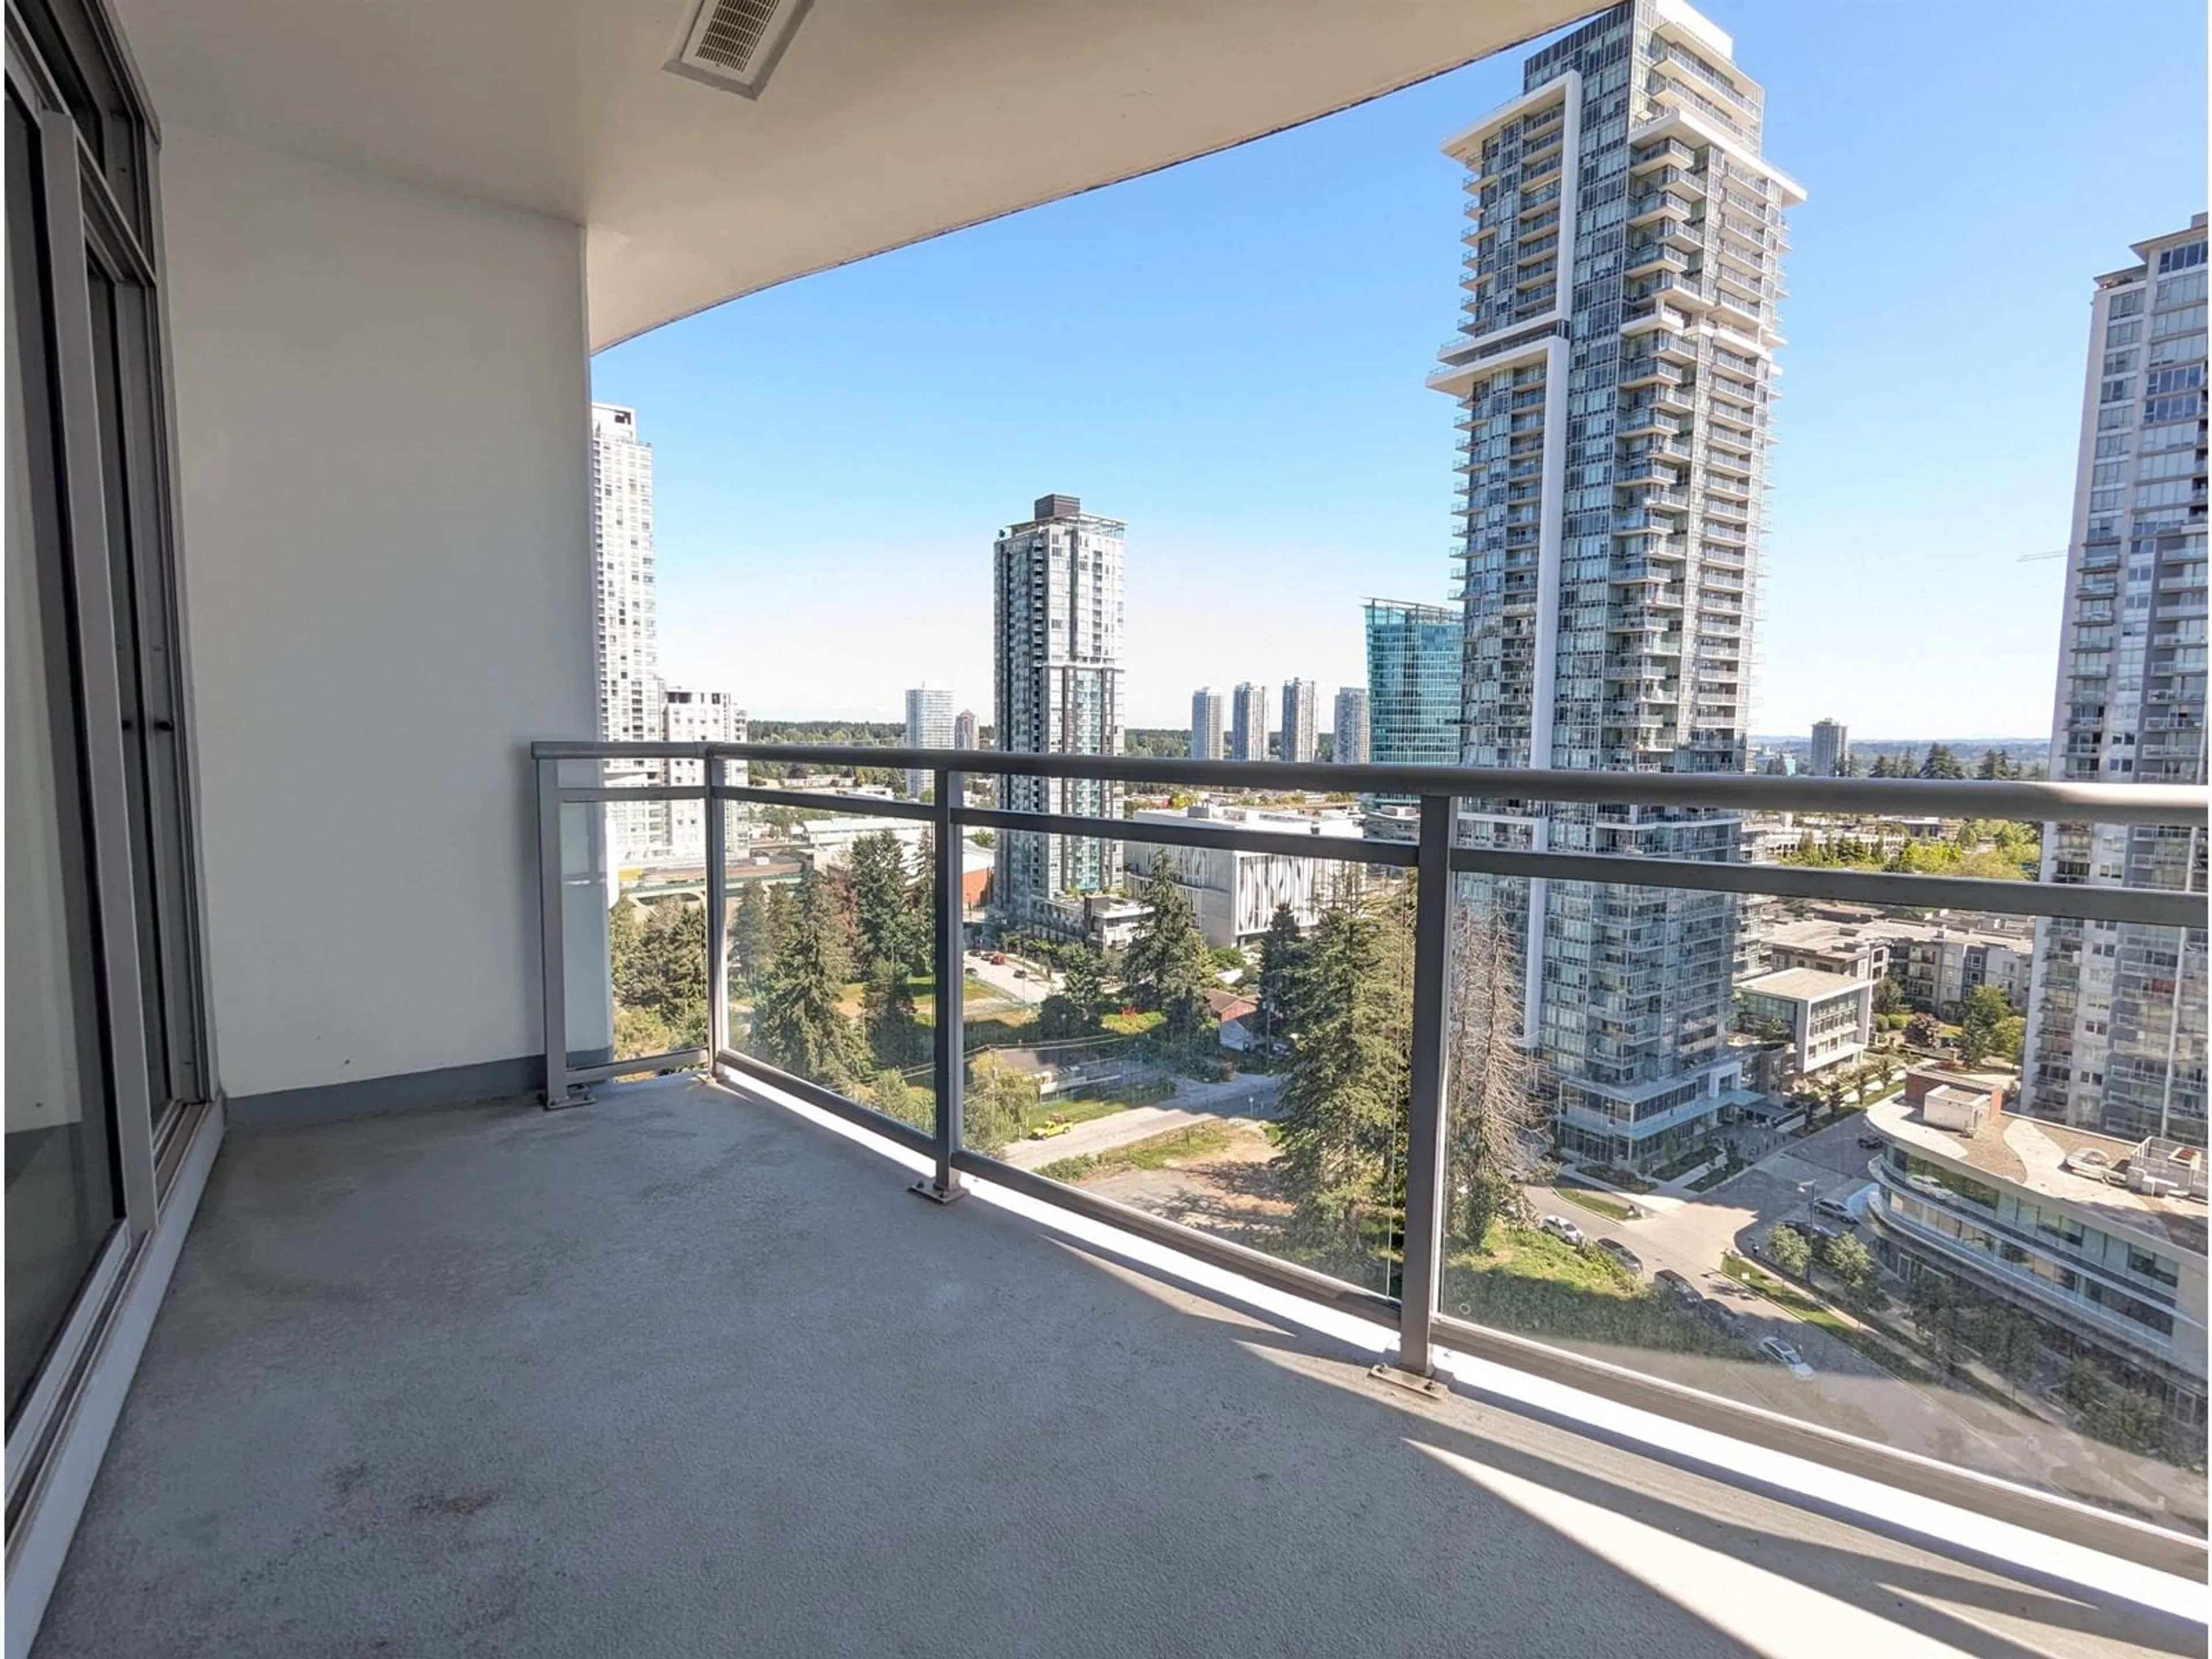 Balcony in the apartment for 1906 13318 104 AVENUE, Surrey British Columbia V3T0R2